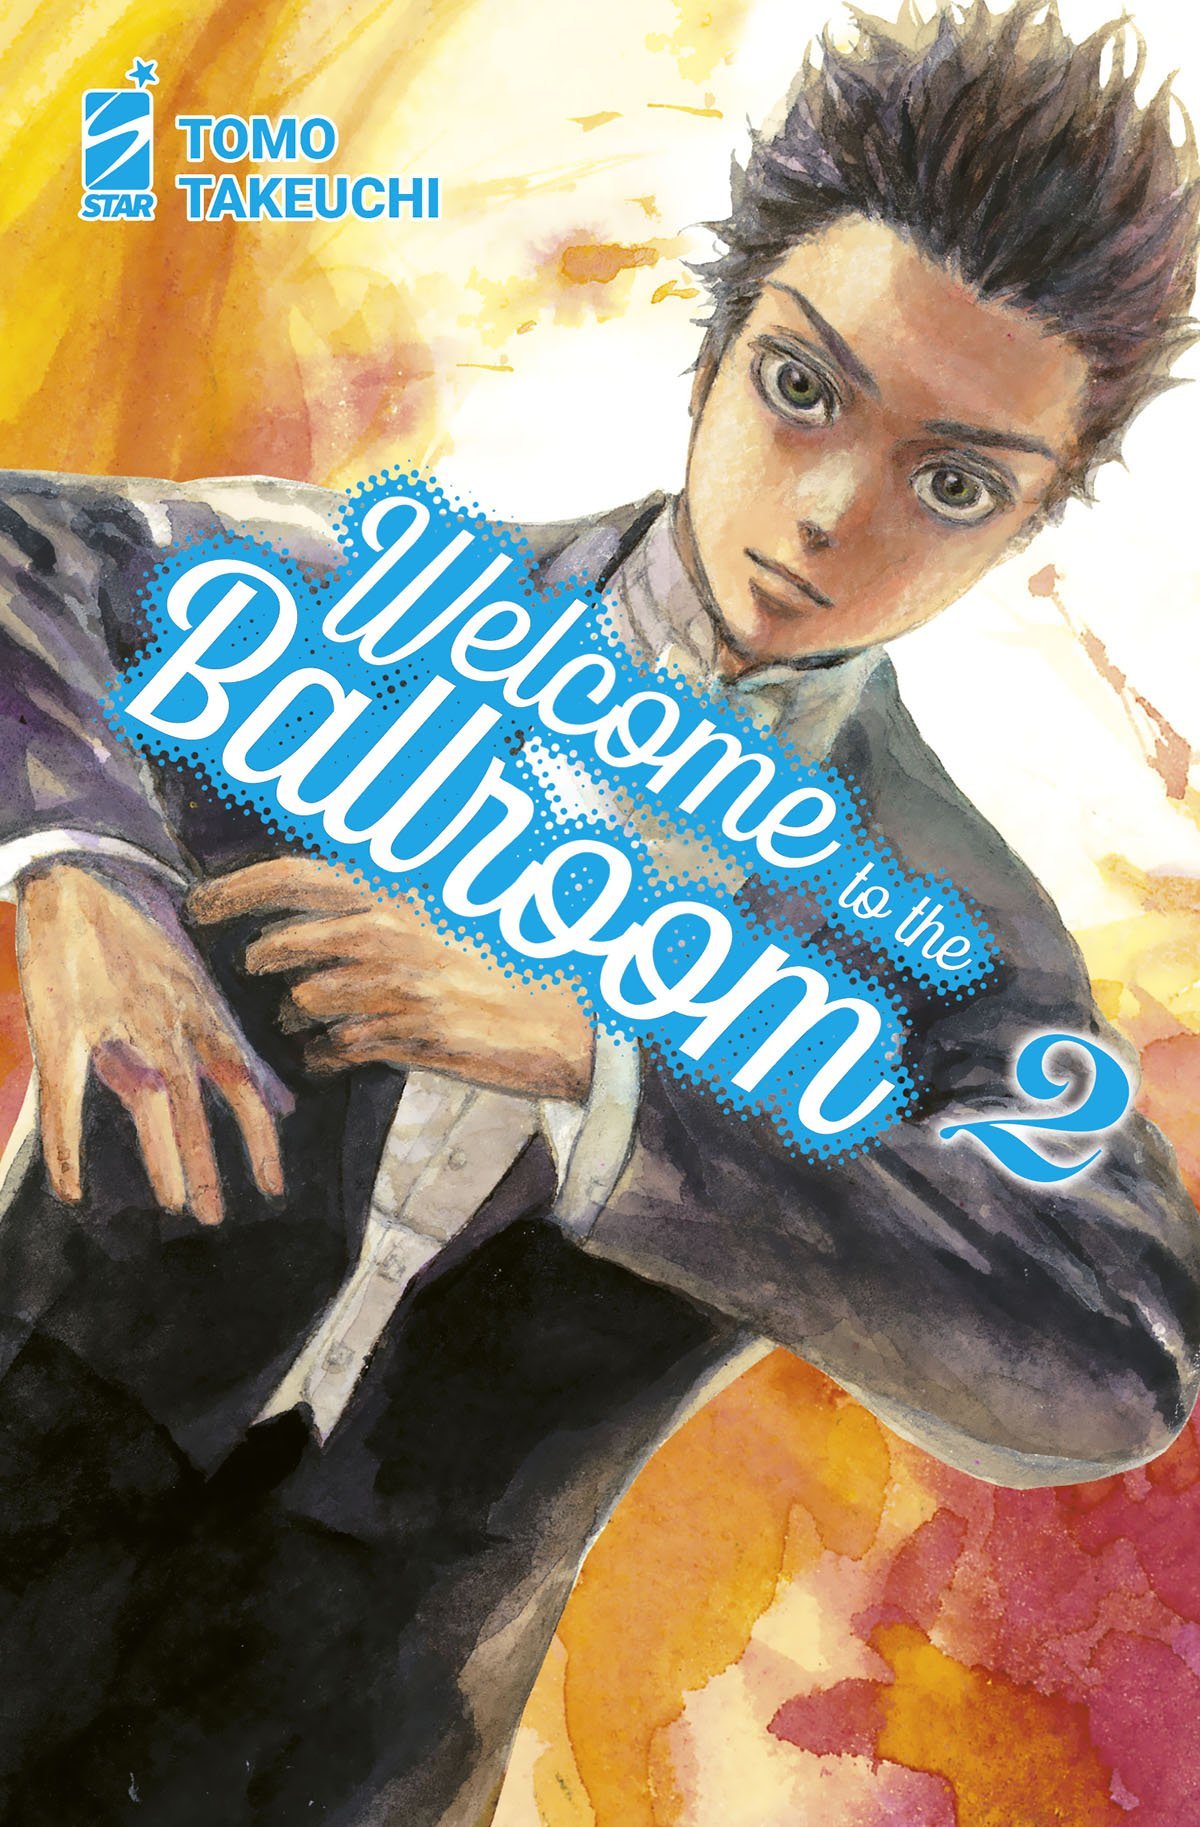 WELCOME TO THE BALLROOM 2 MITICO 292